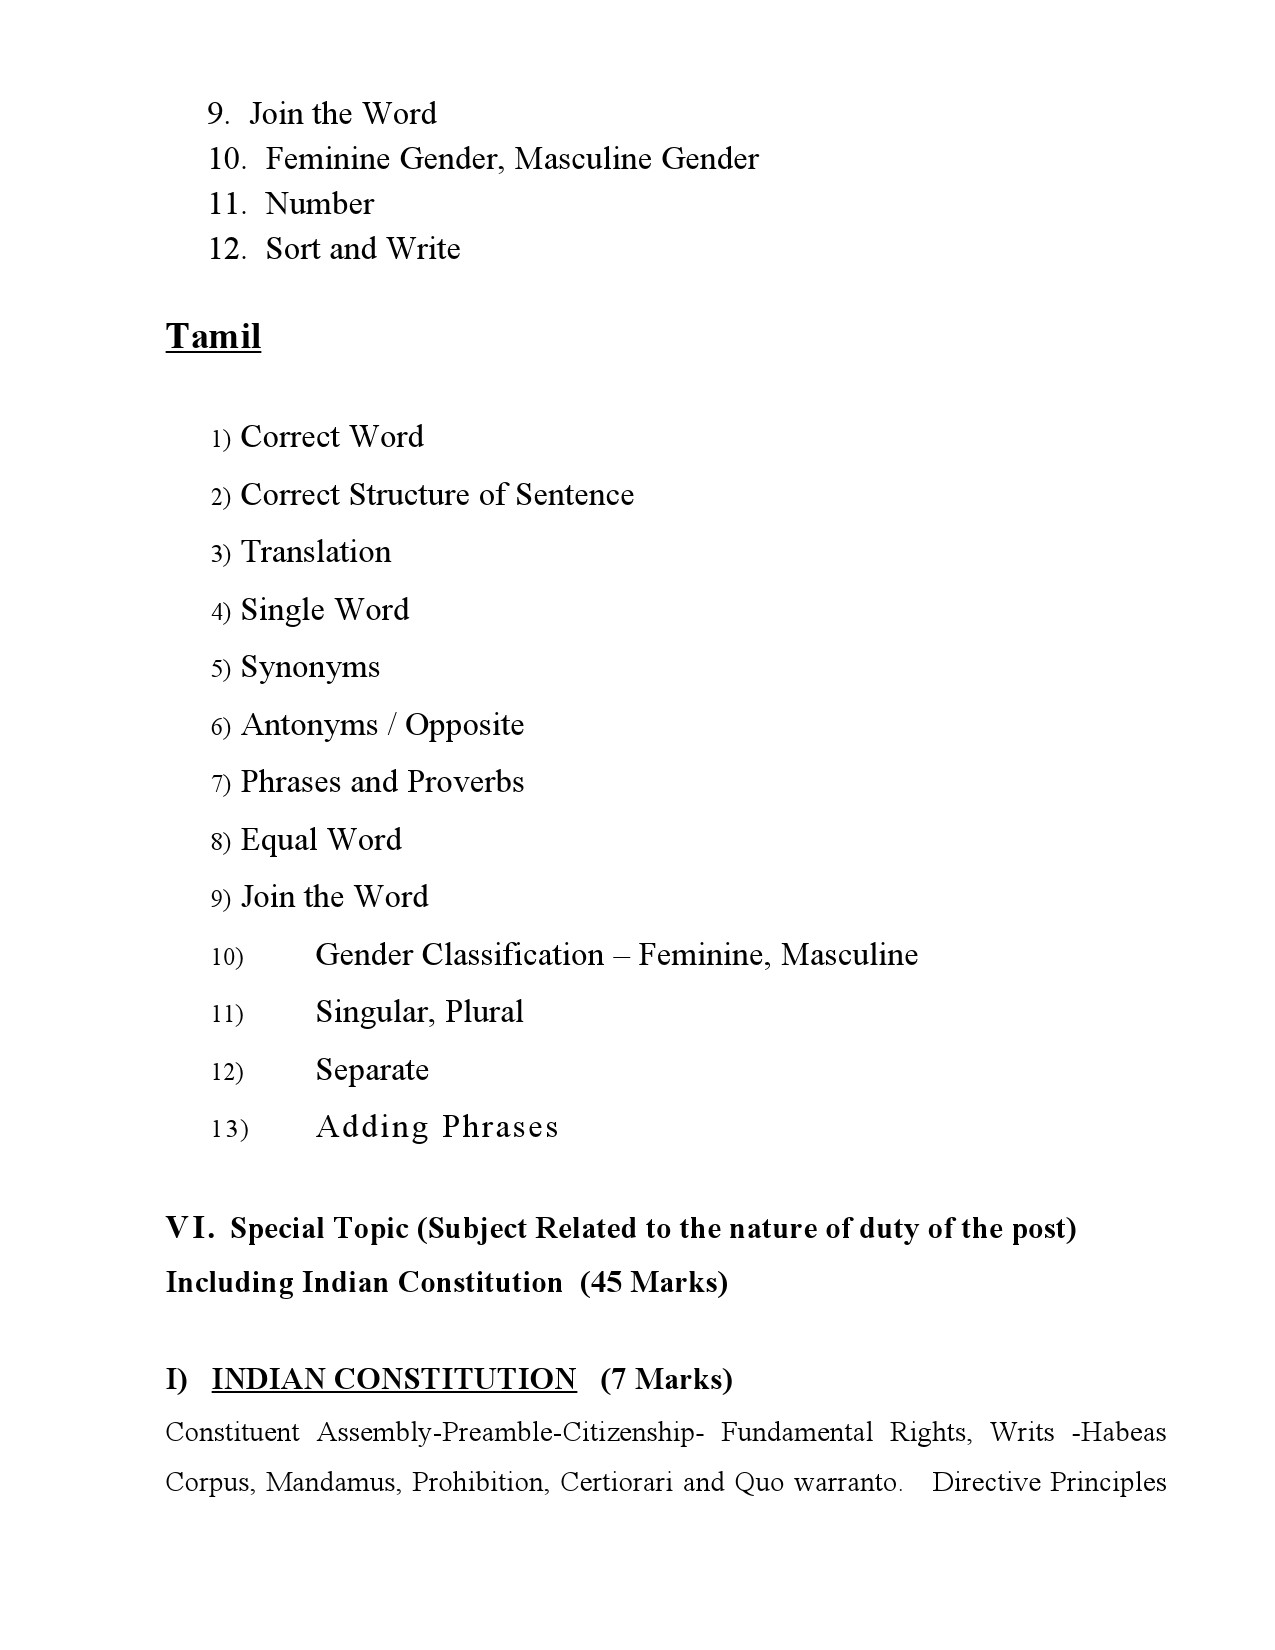 Syllabus For The 2023 Main Examination Of Sub Inspector Of Police - Notification Image 7